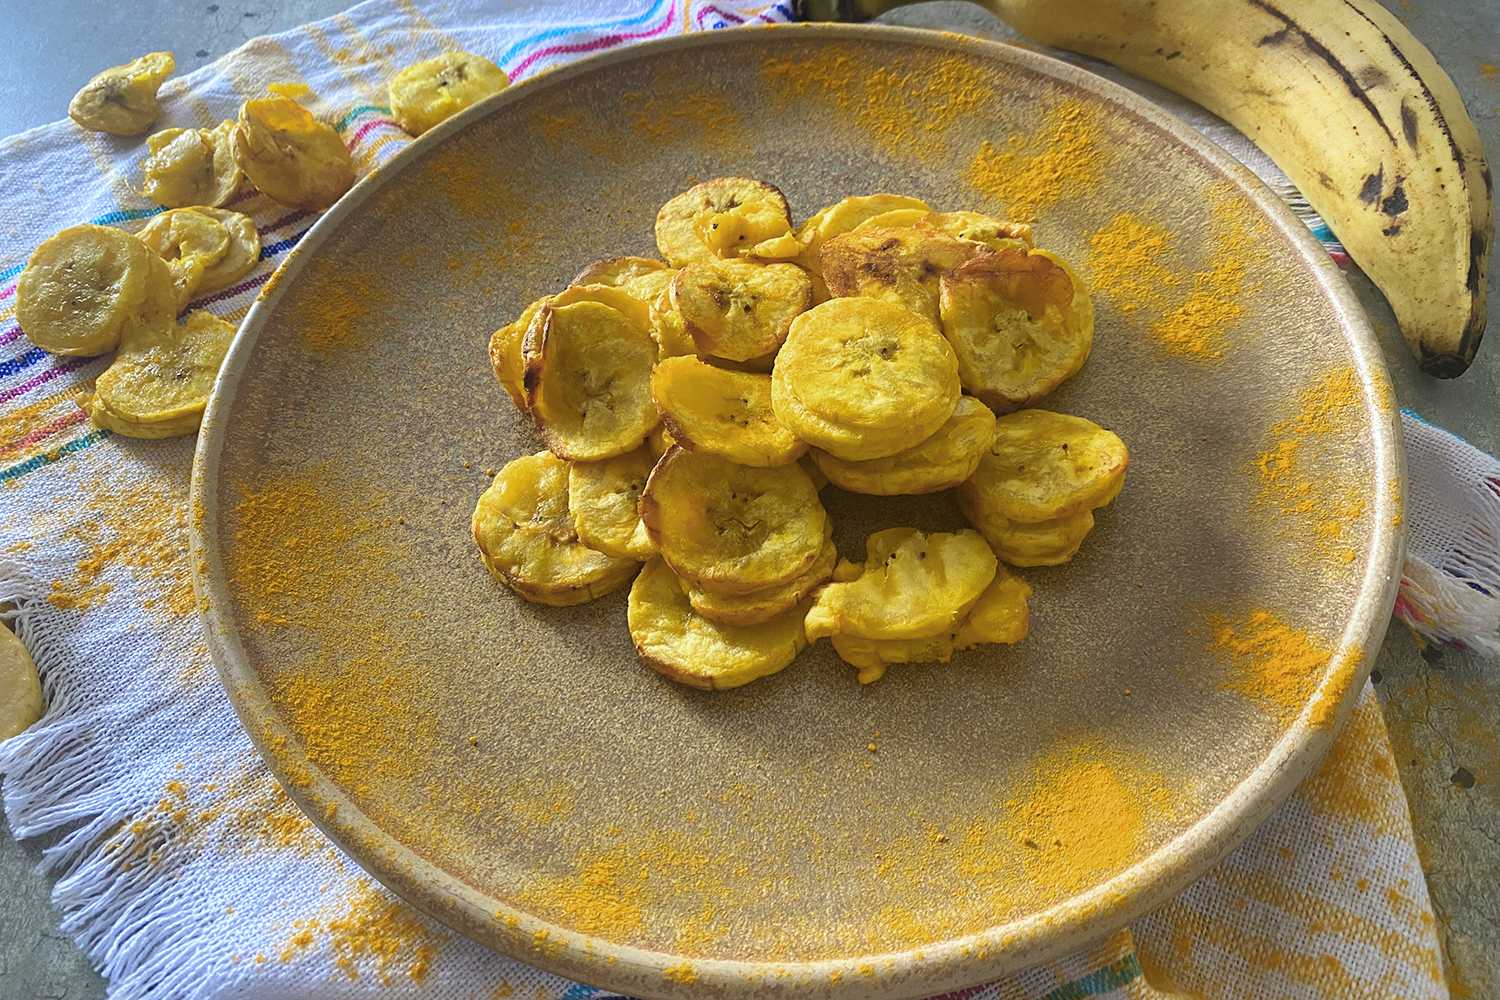 Banana chips slices on a gray plate with curcumin on sides